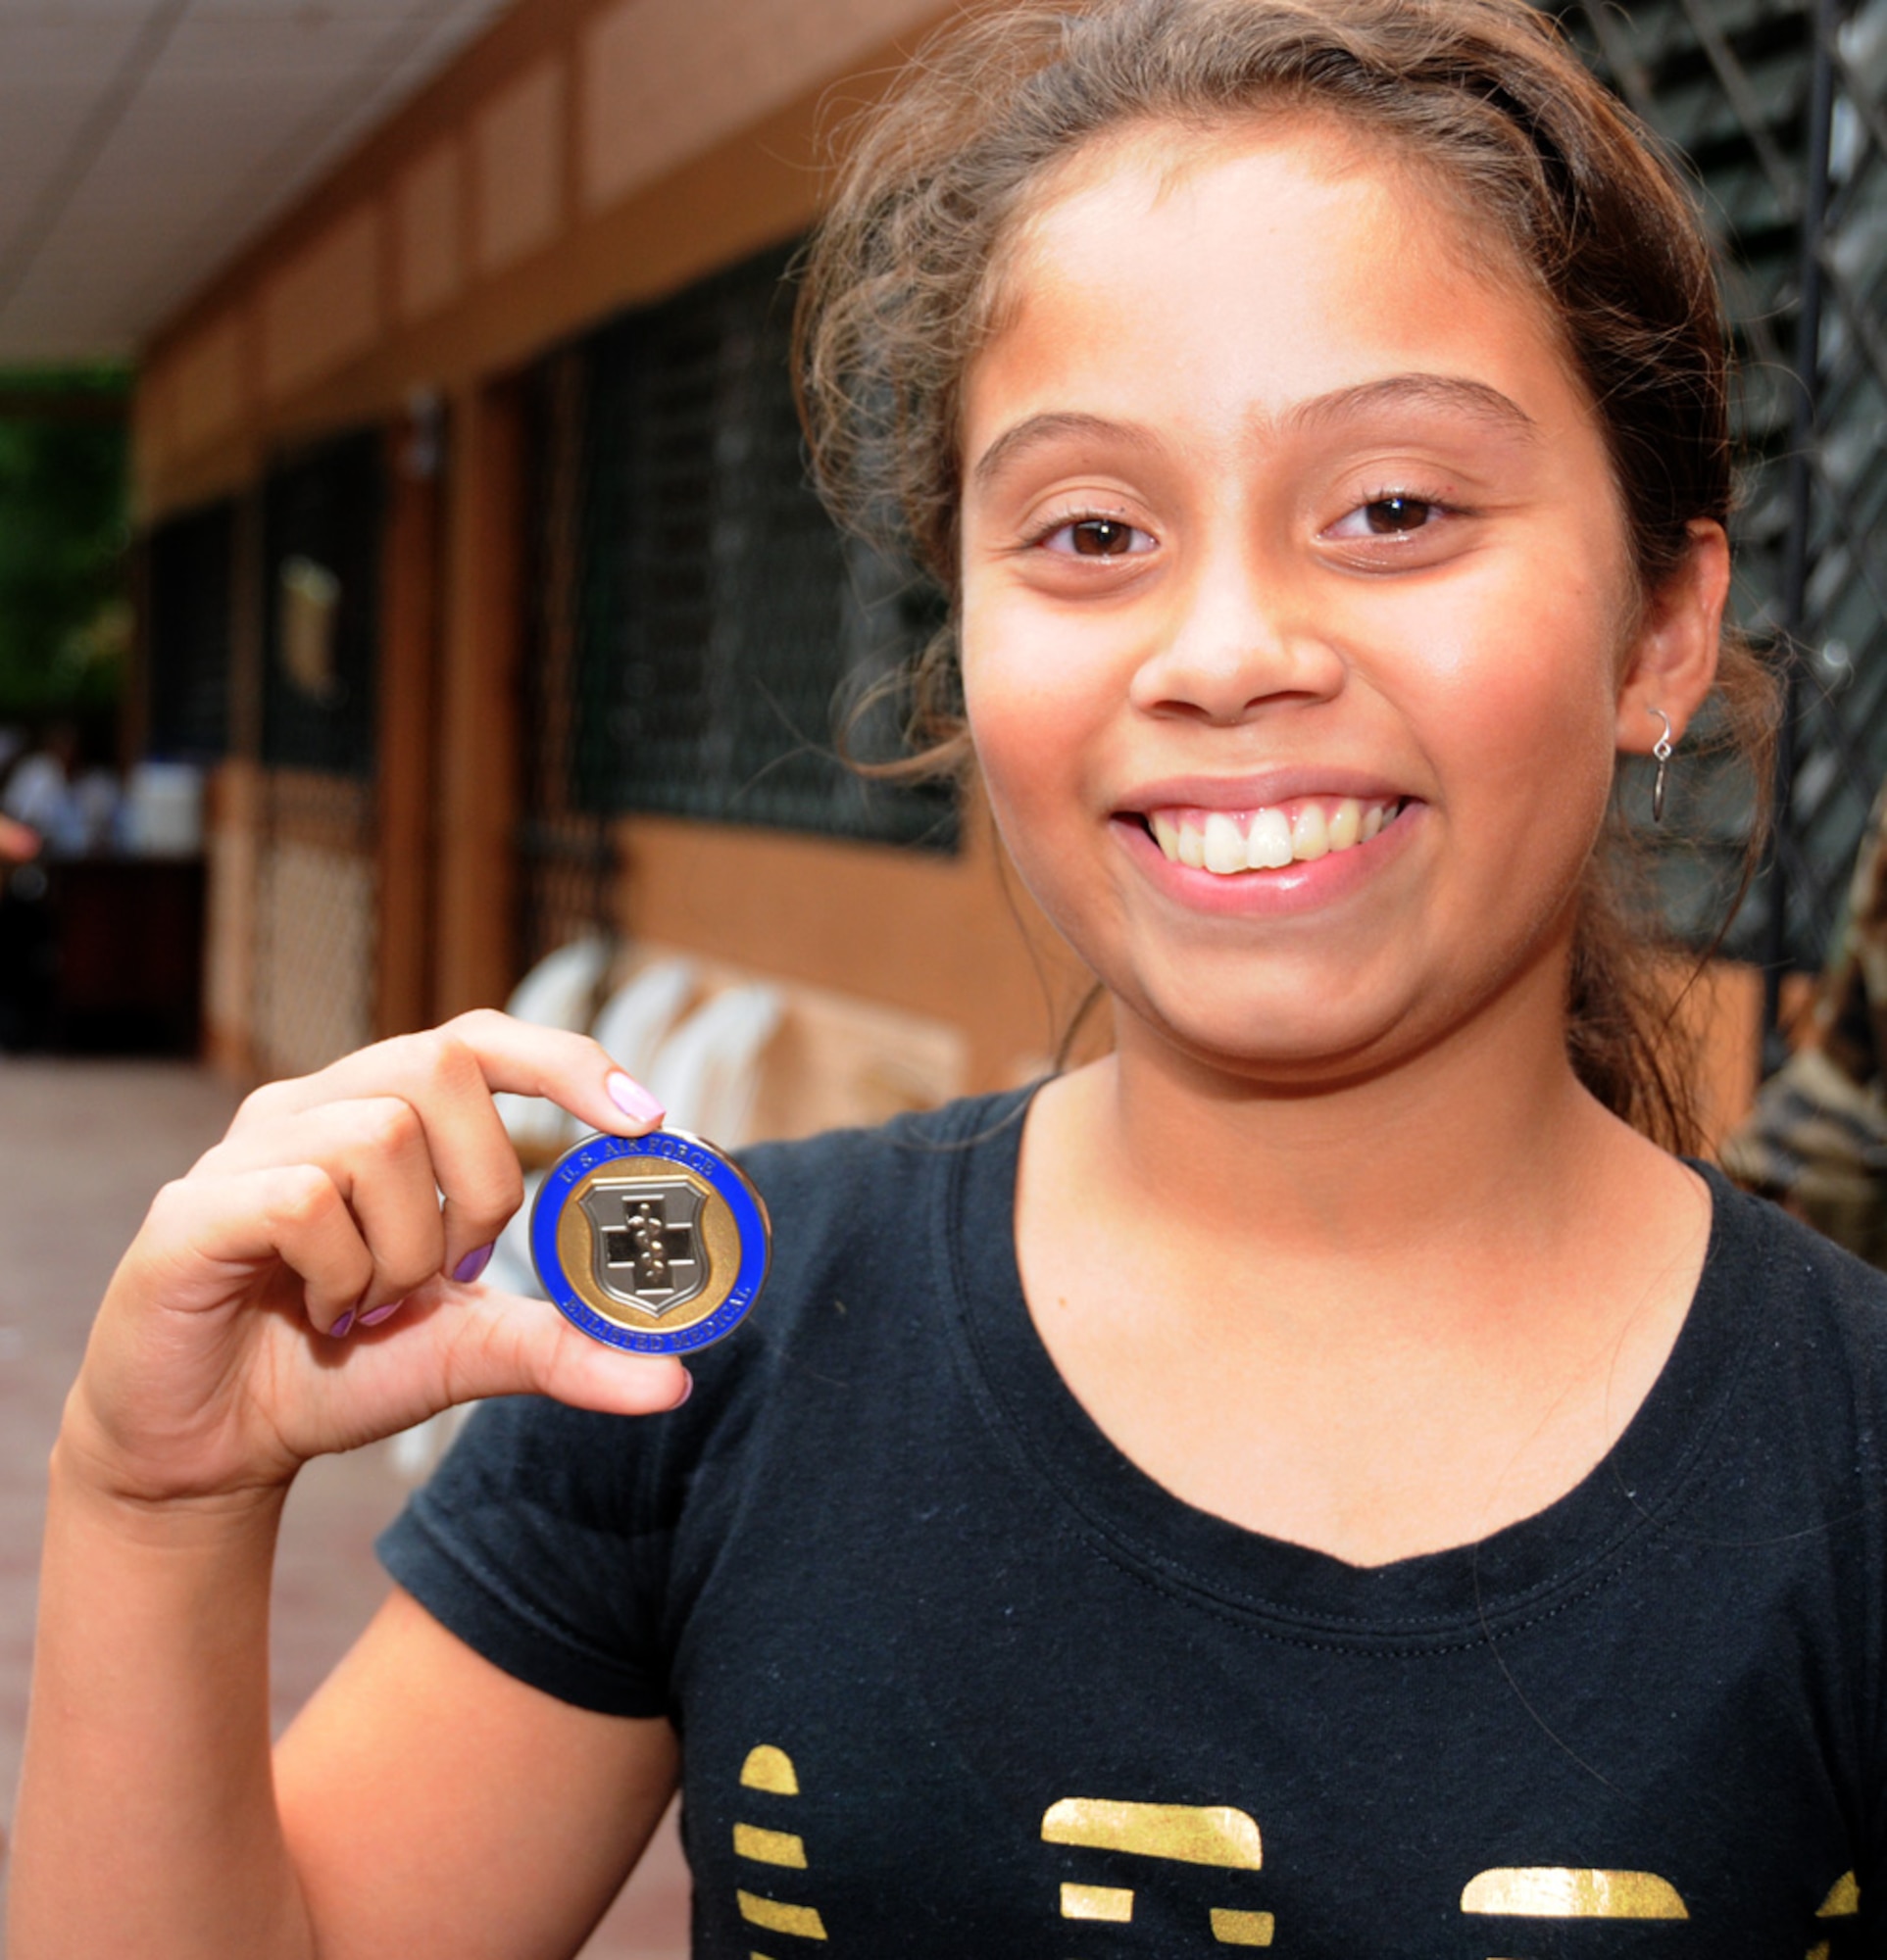 SEBACO, NICARAGUA -- Antonella Espinoza, a local 12-year-old student, shows off the coin she received here Aug. 10, 2011 for volunteering as a transplator during the Medical Readiness Exercise, or MEDRETE. Espinoza came to the MEDRETE site to be seen for her allergies and ended up staying on to help the staff communicate with their patients more effectively. (USAF photo by Senior Airman Meredith A. H. Thomas, 916 ARW/PA)